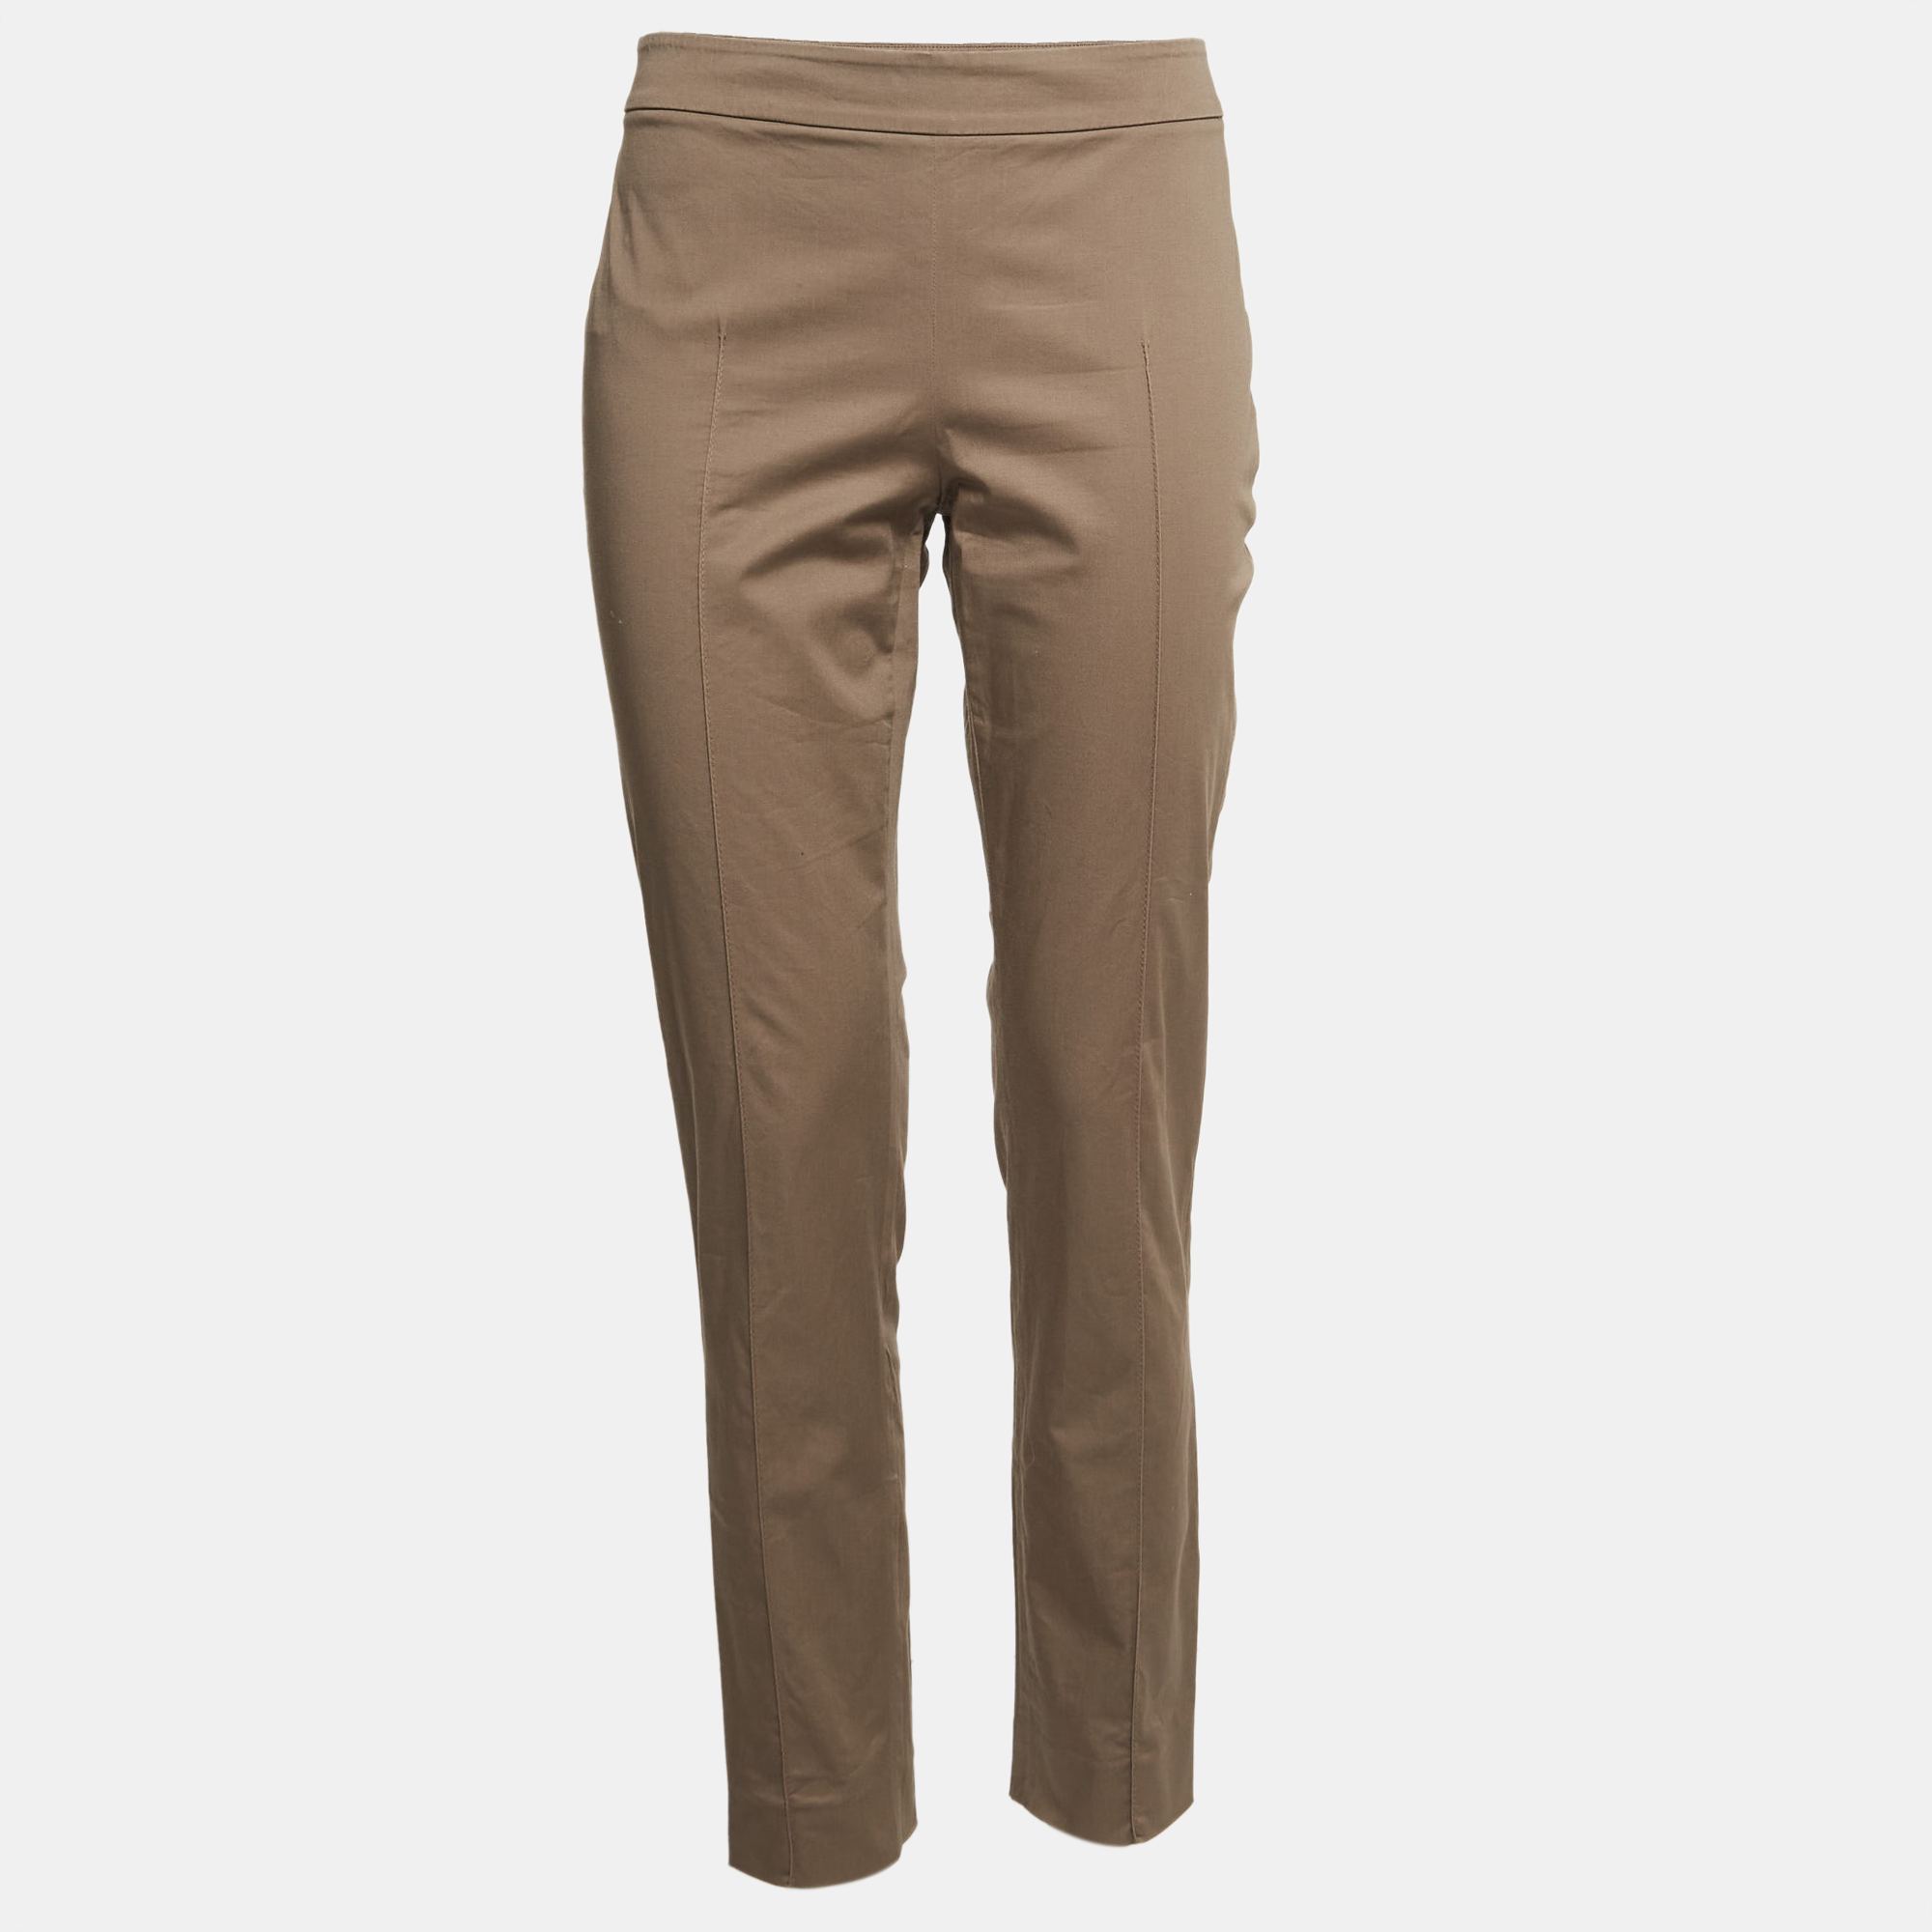 Moschino cheap and chic brown cotton skinny trousers m